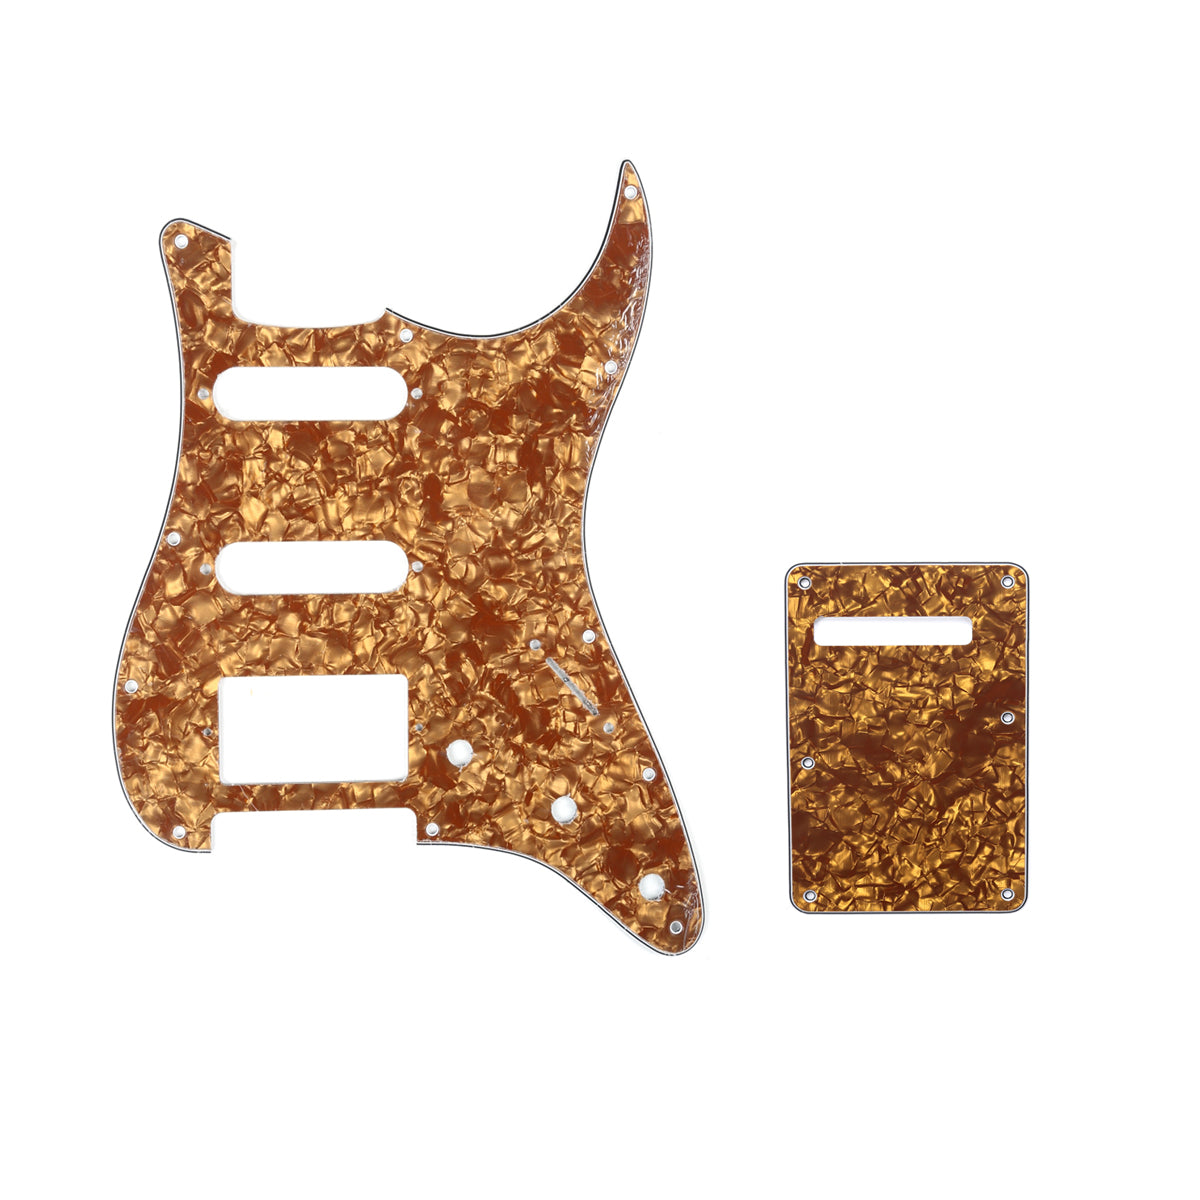 Musiclily SSH 11 Hole Strat Guitar Pickguard and BackPlate Set for Fender USA/Mexican Standard Stratocaster Modern Style, 4Ply Bronze Pearl